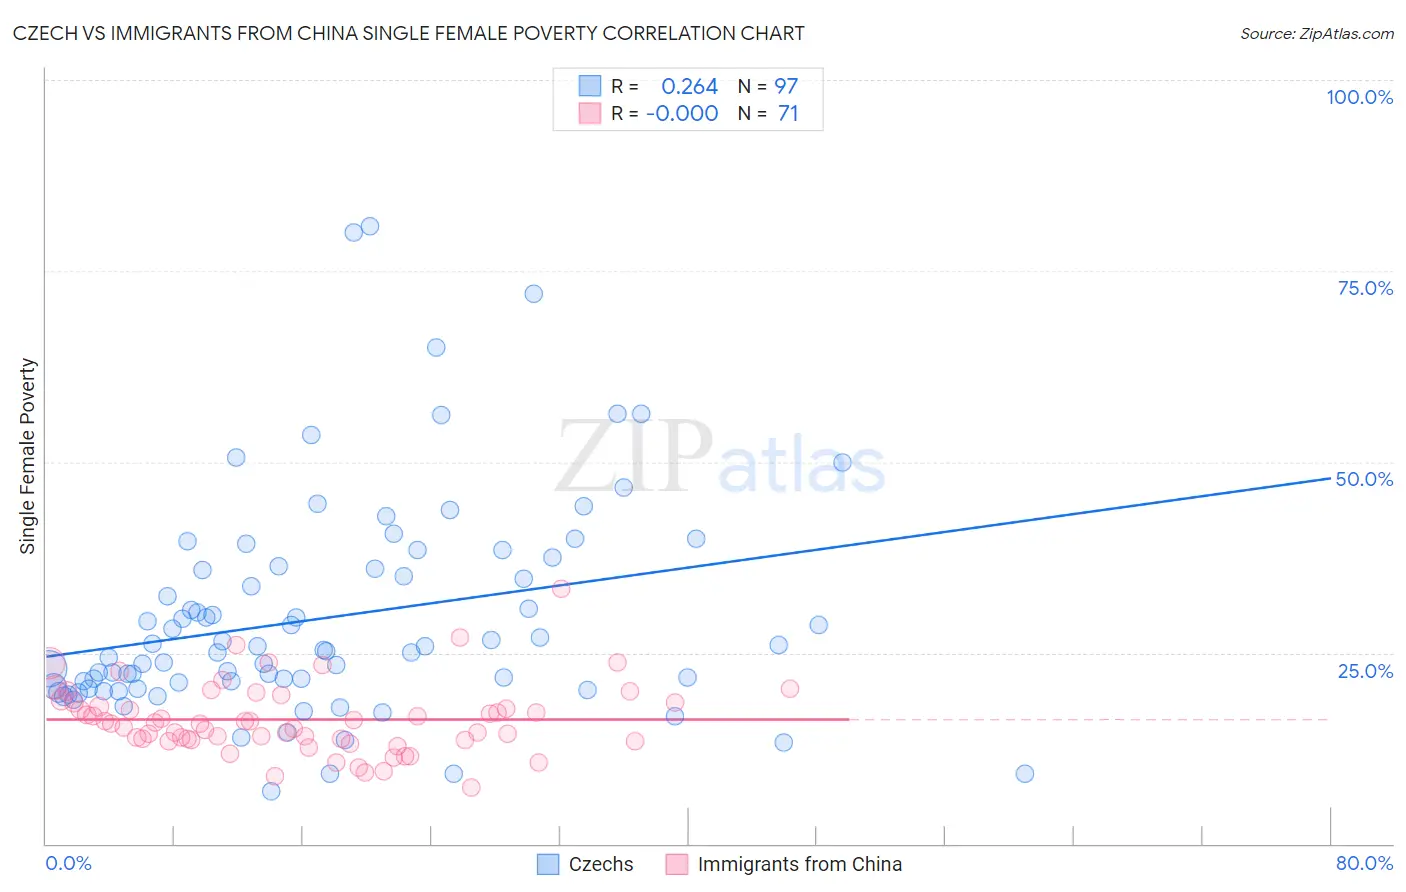 Czech vs Immigrants from China Single Female Poverty